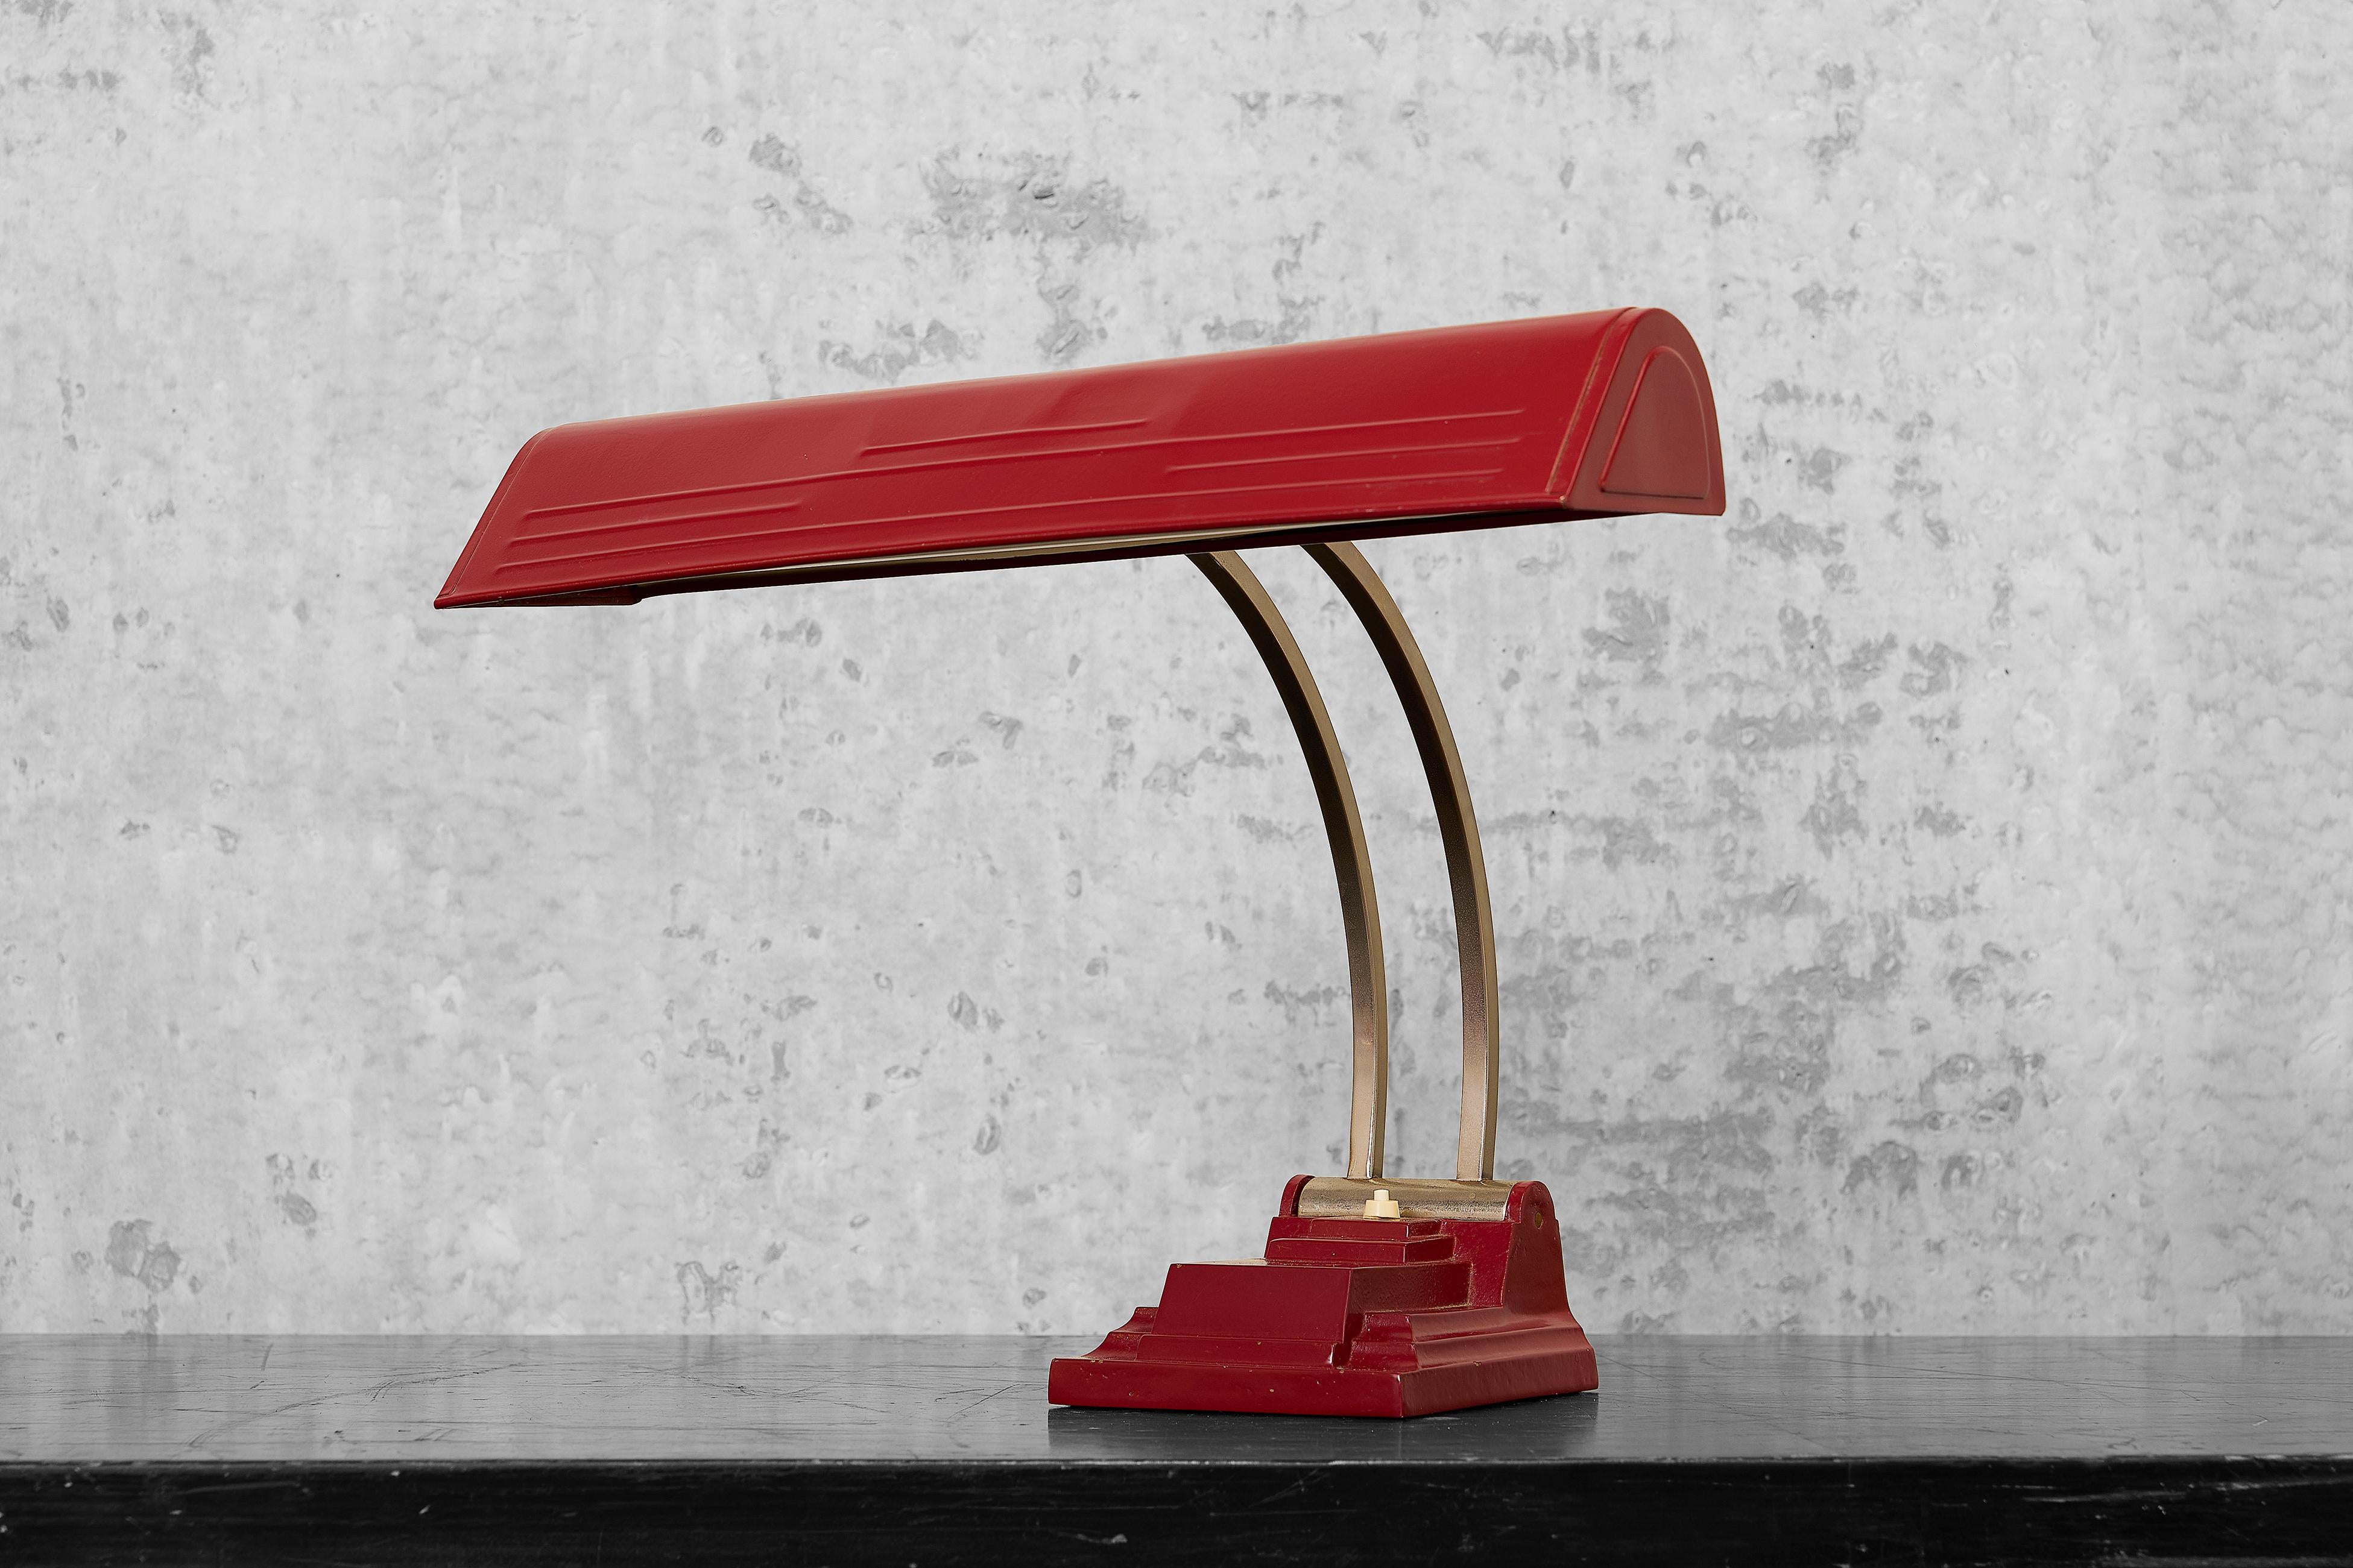 A robust industrial Bordeaux red desk lamp with a fluorescent light. The lamp has a solid, heavy rectangular iron stepped base, a curved chrome rod and a hinged shade. The lamp has been repainted and rewired. The lamp was possibly designed by the